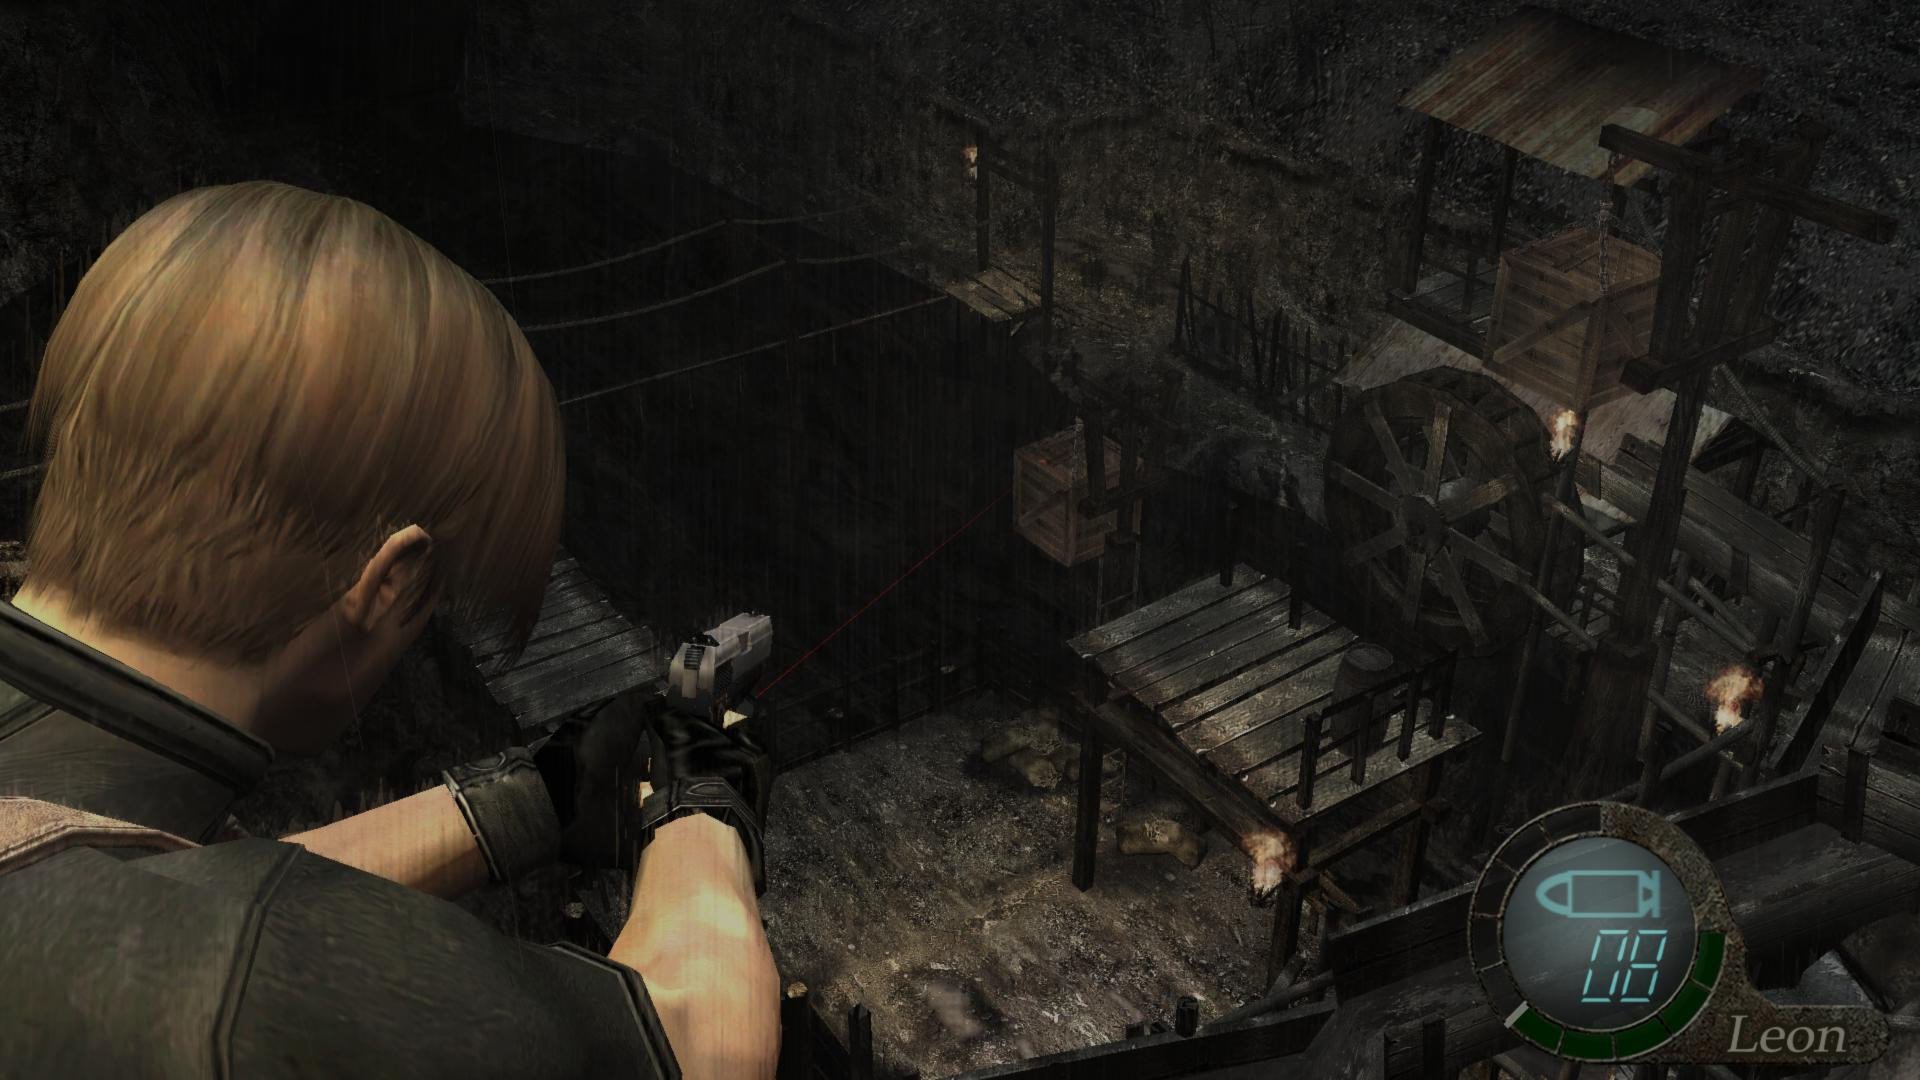 How to solve the church lights puzzle - Resident Evil 4